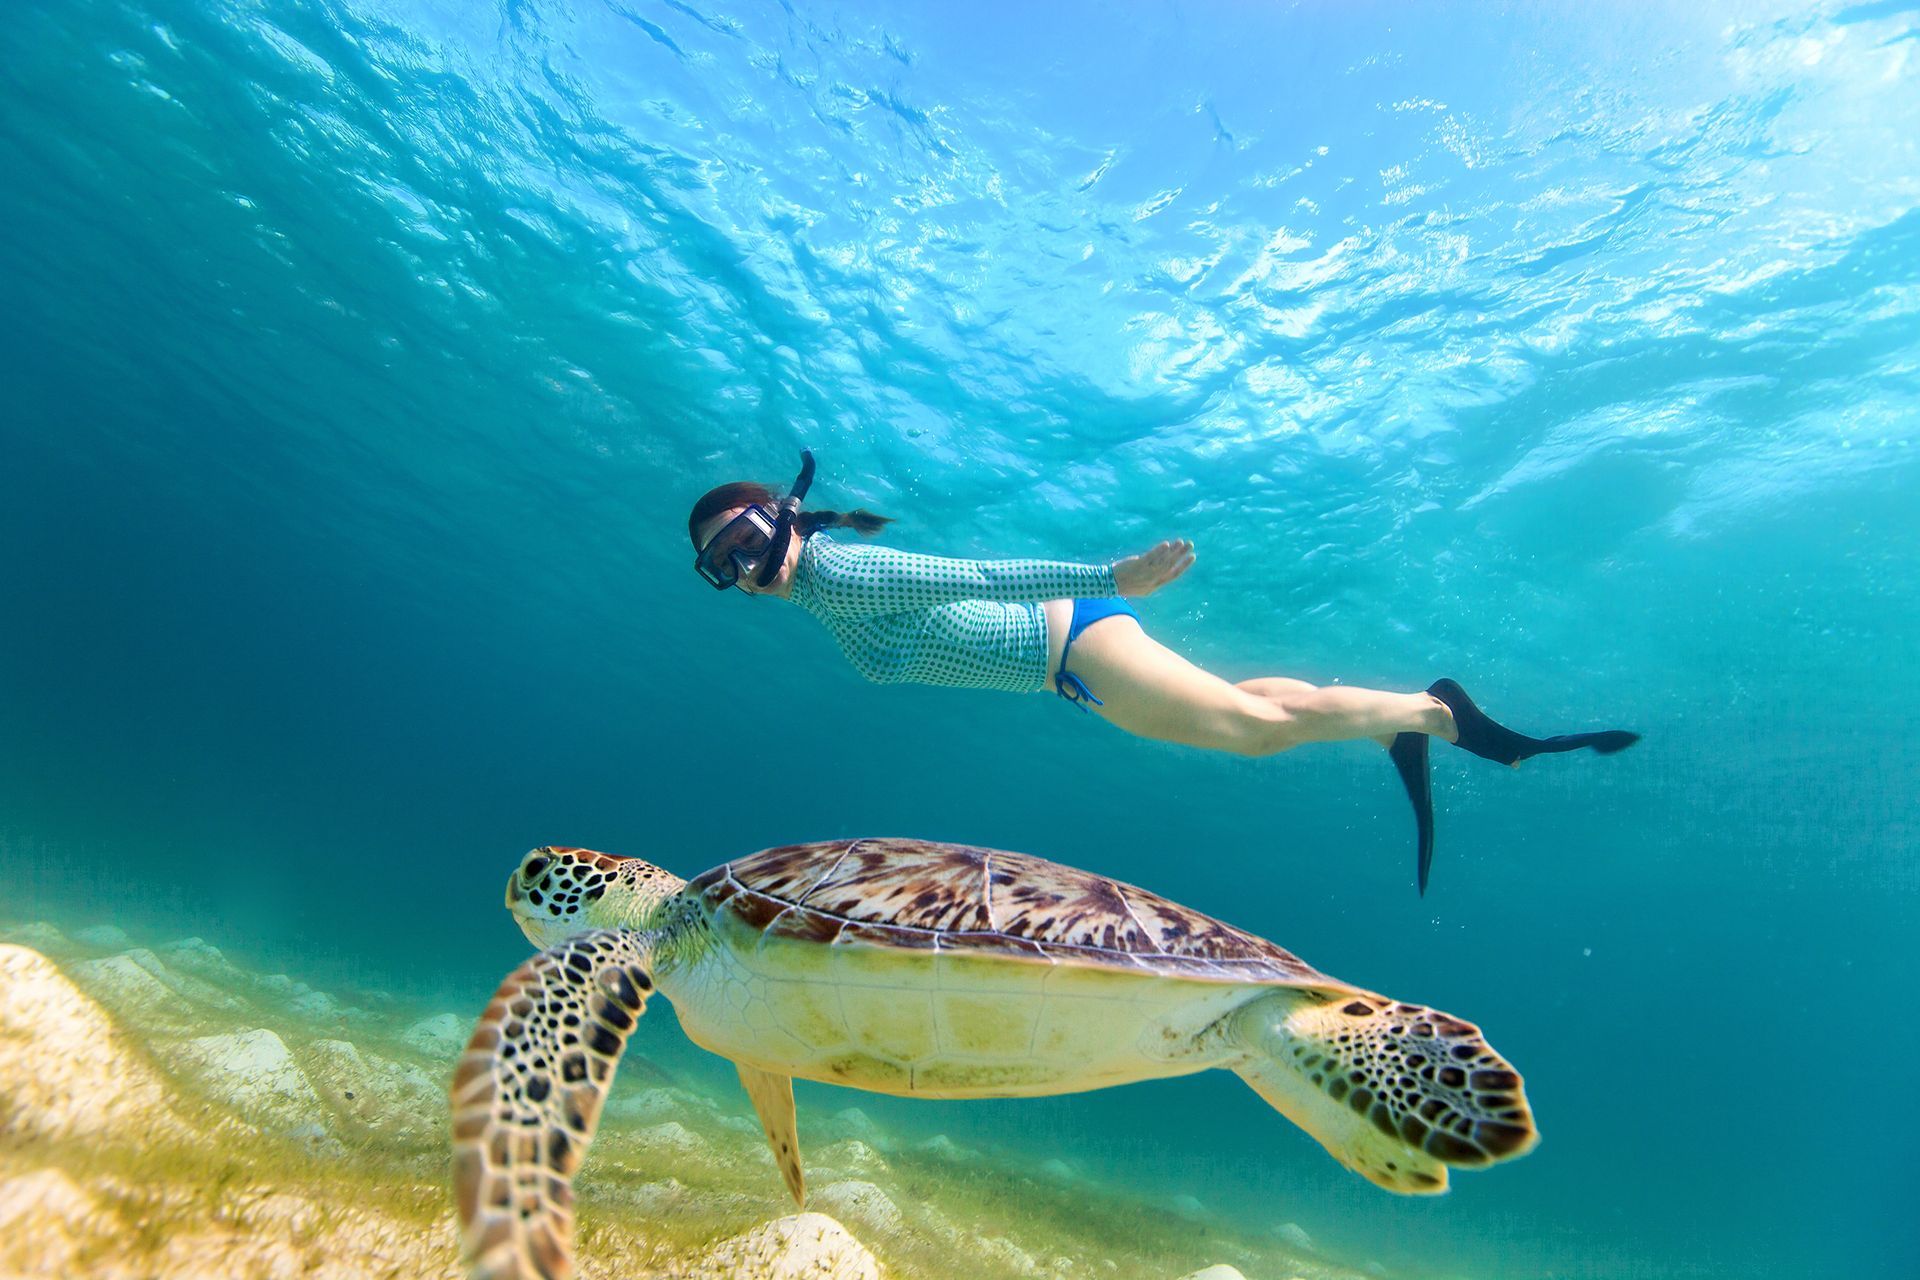 A woman is swimming next to a sea turtle in the ocean